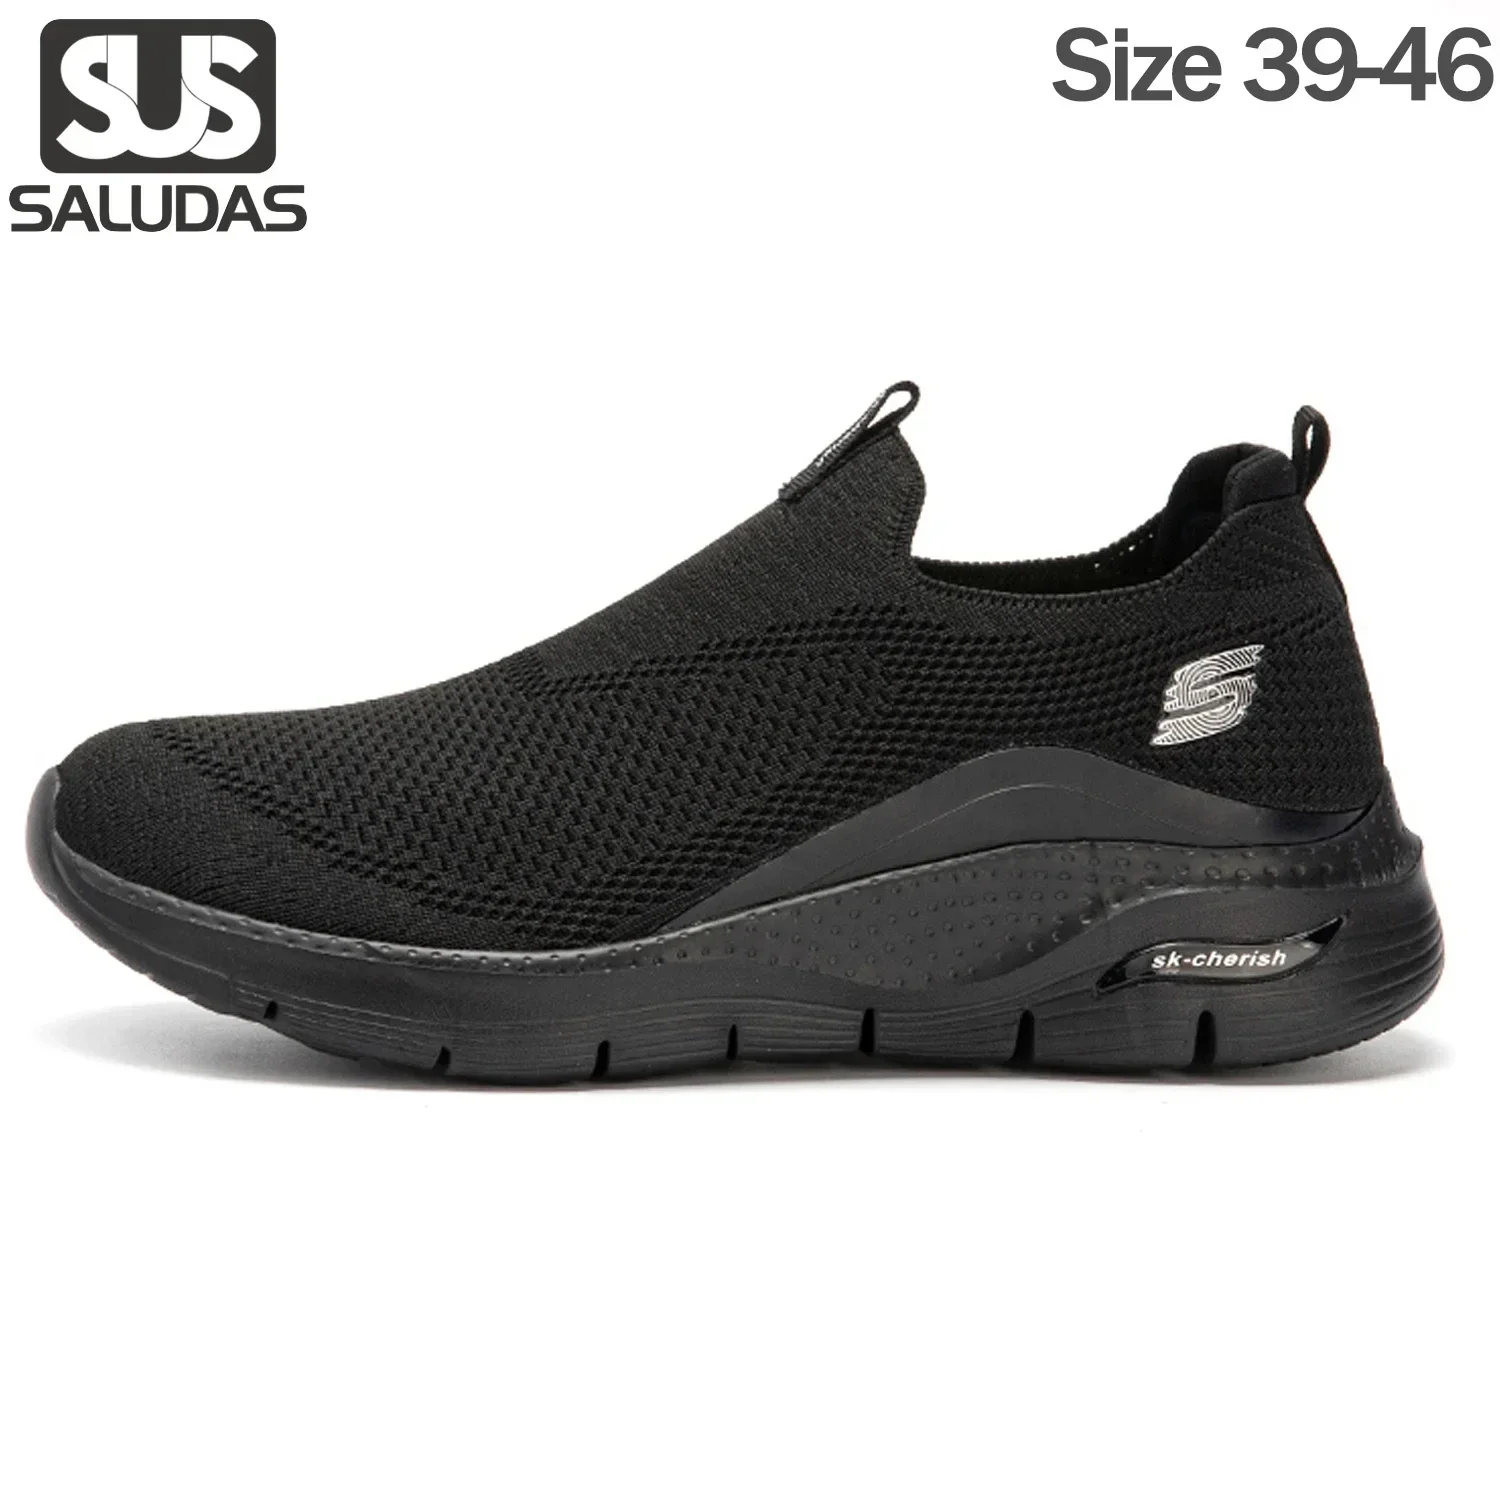 

SALUDAS Men Sports Shoes Luxury Brand Male Shoes Fashion Tennis Runners Trends Slip-On Casual Shoes Thick Bottom Athletic Shoes